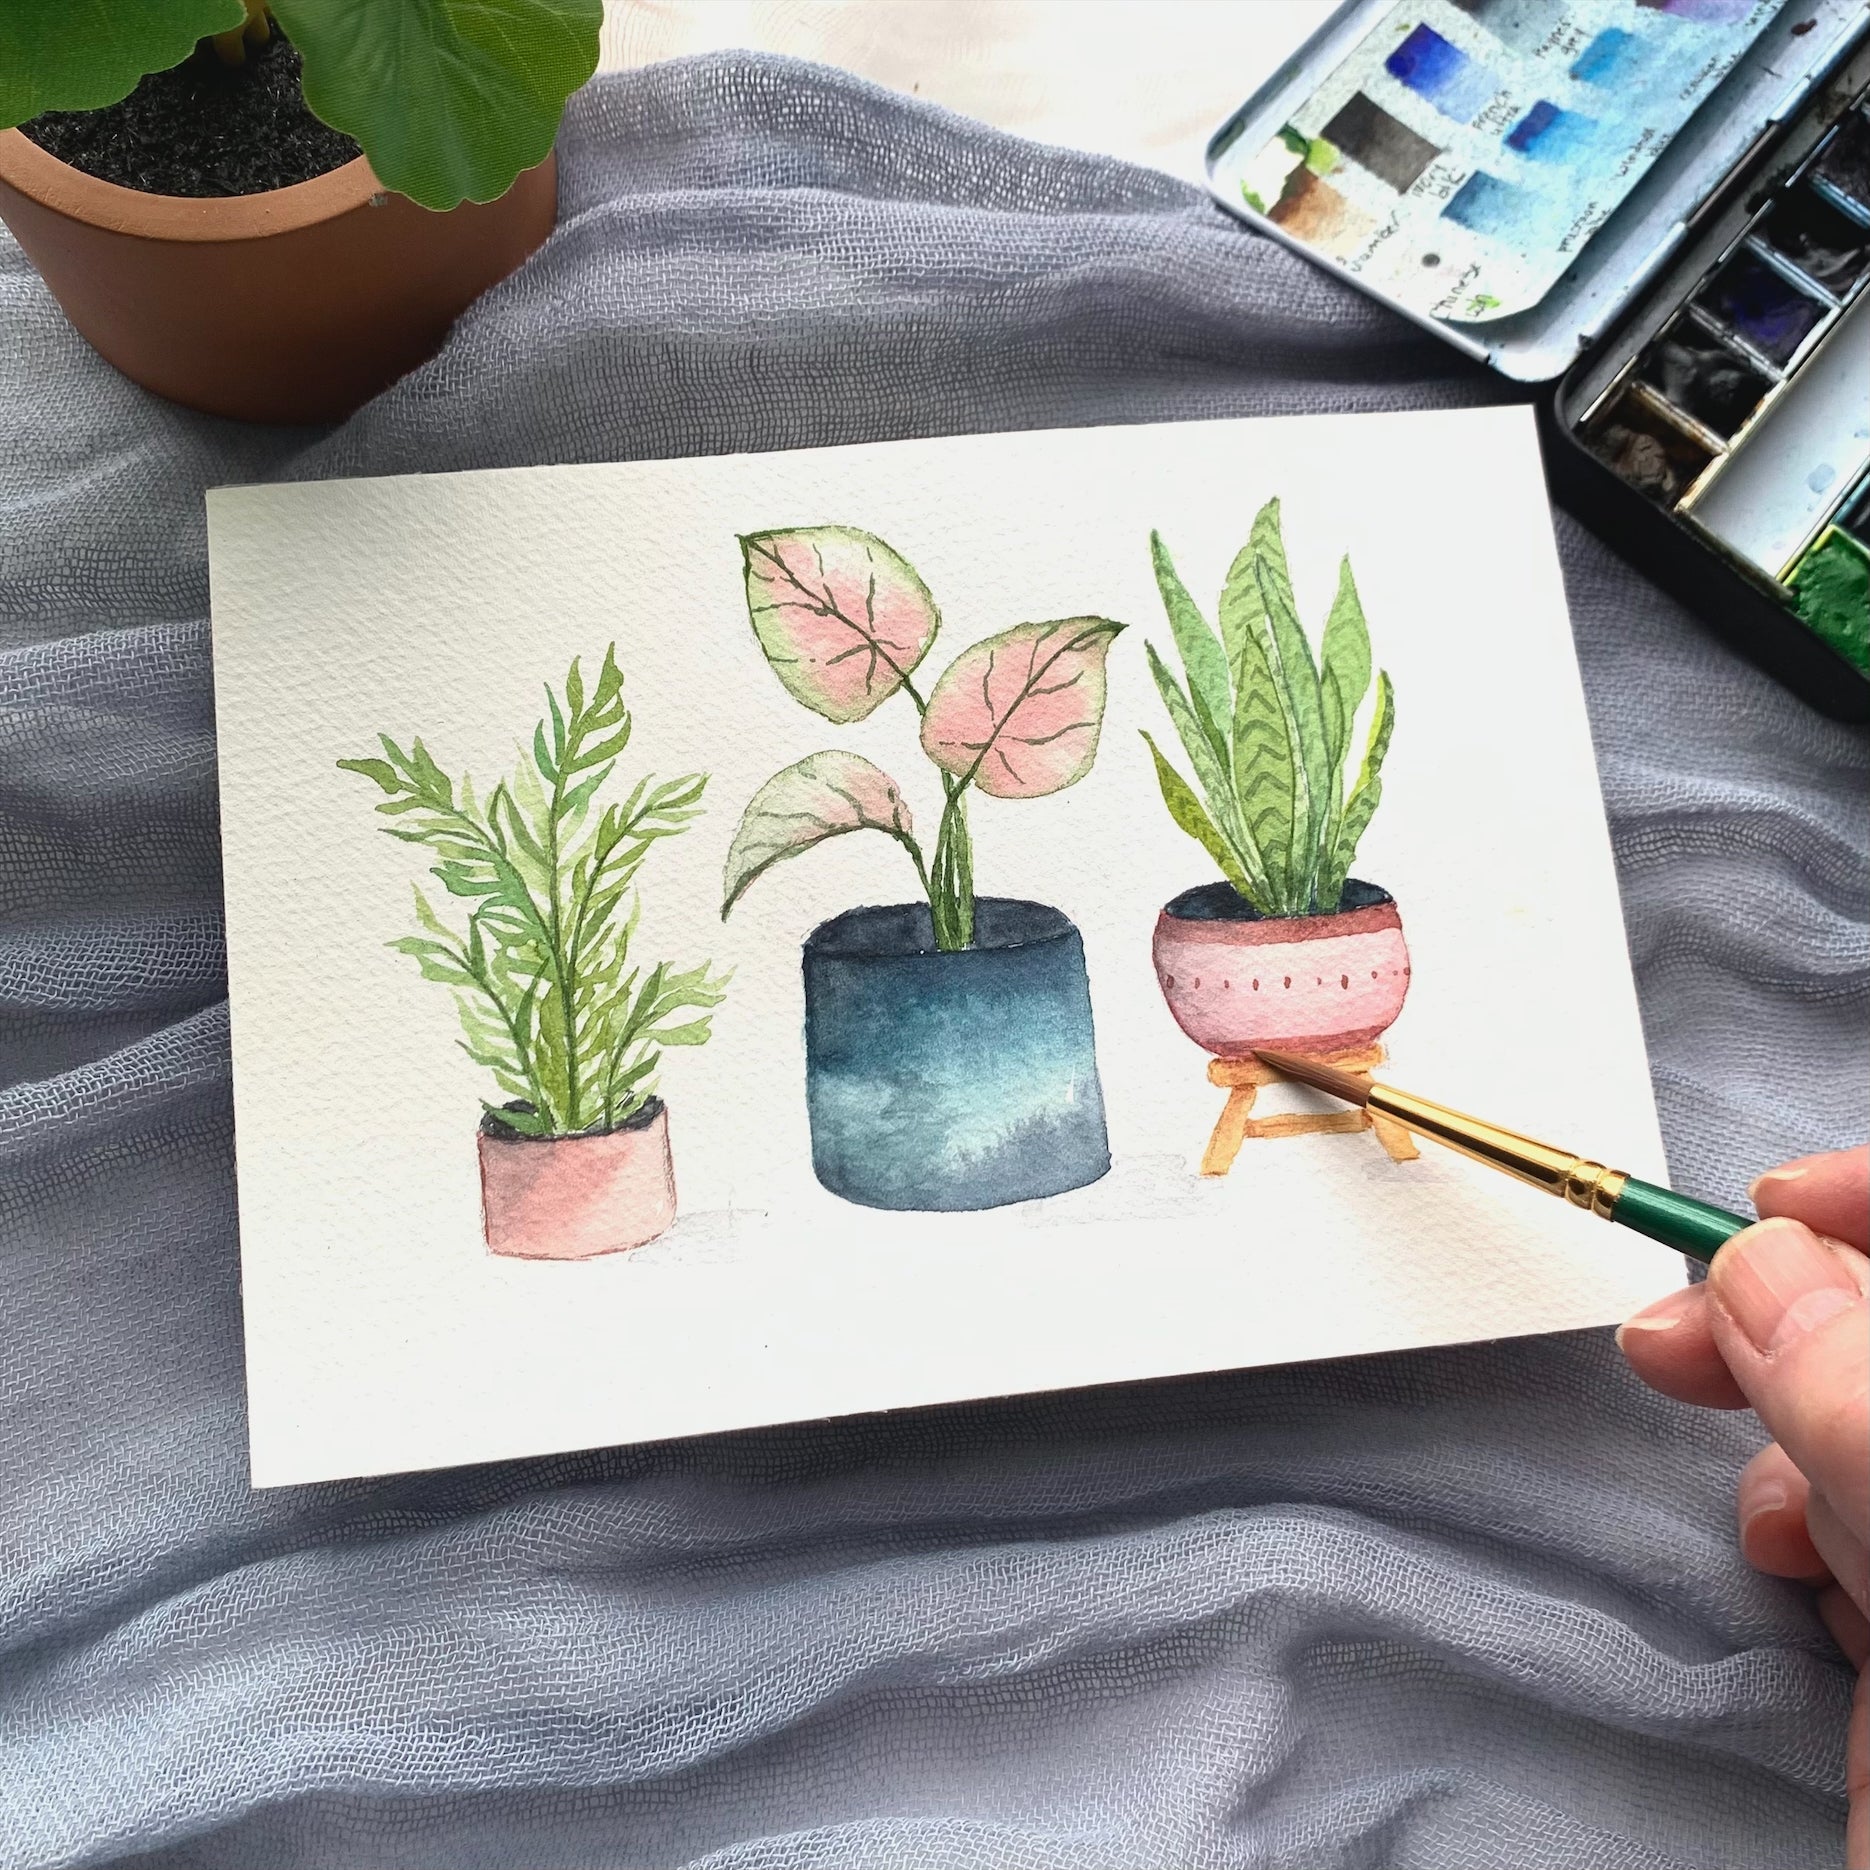 Watercolor Landscapes For Beginners With Kolbie Blume – Let's Get Artsy